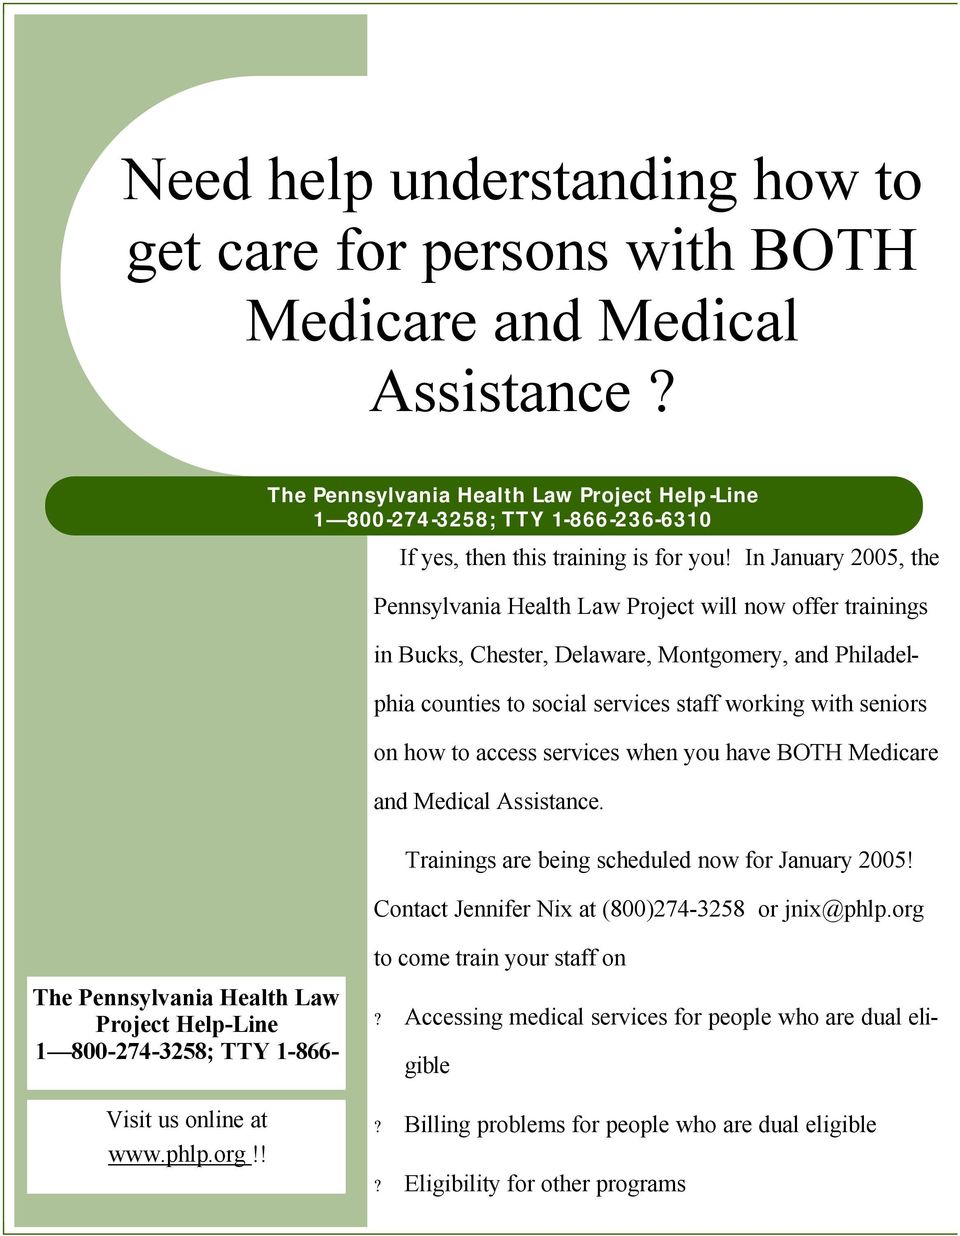 In January 2005, the Pennsylvania Health Law Project will now offer trainings in Bucks, Chester, Delaware, Montgomery, and Philadelphia counties to social services staff working with seniors on how